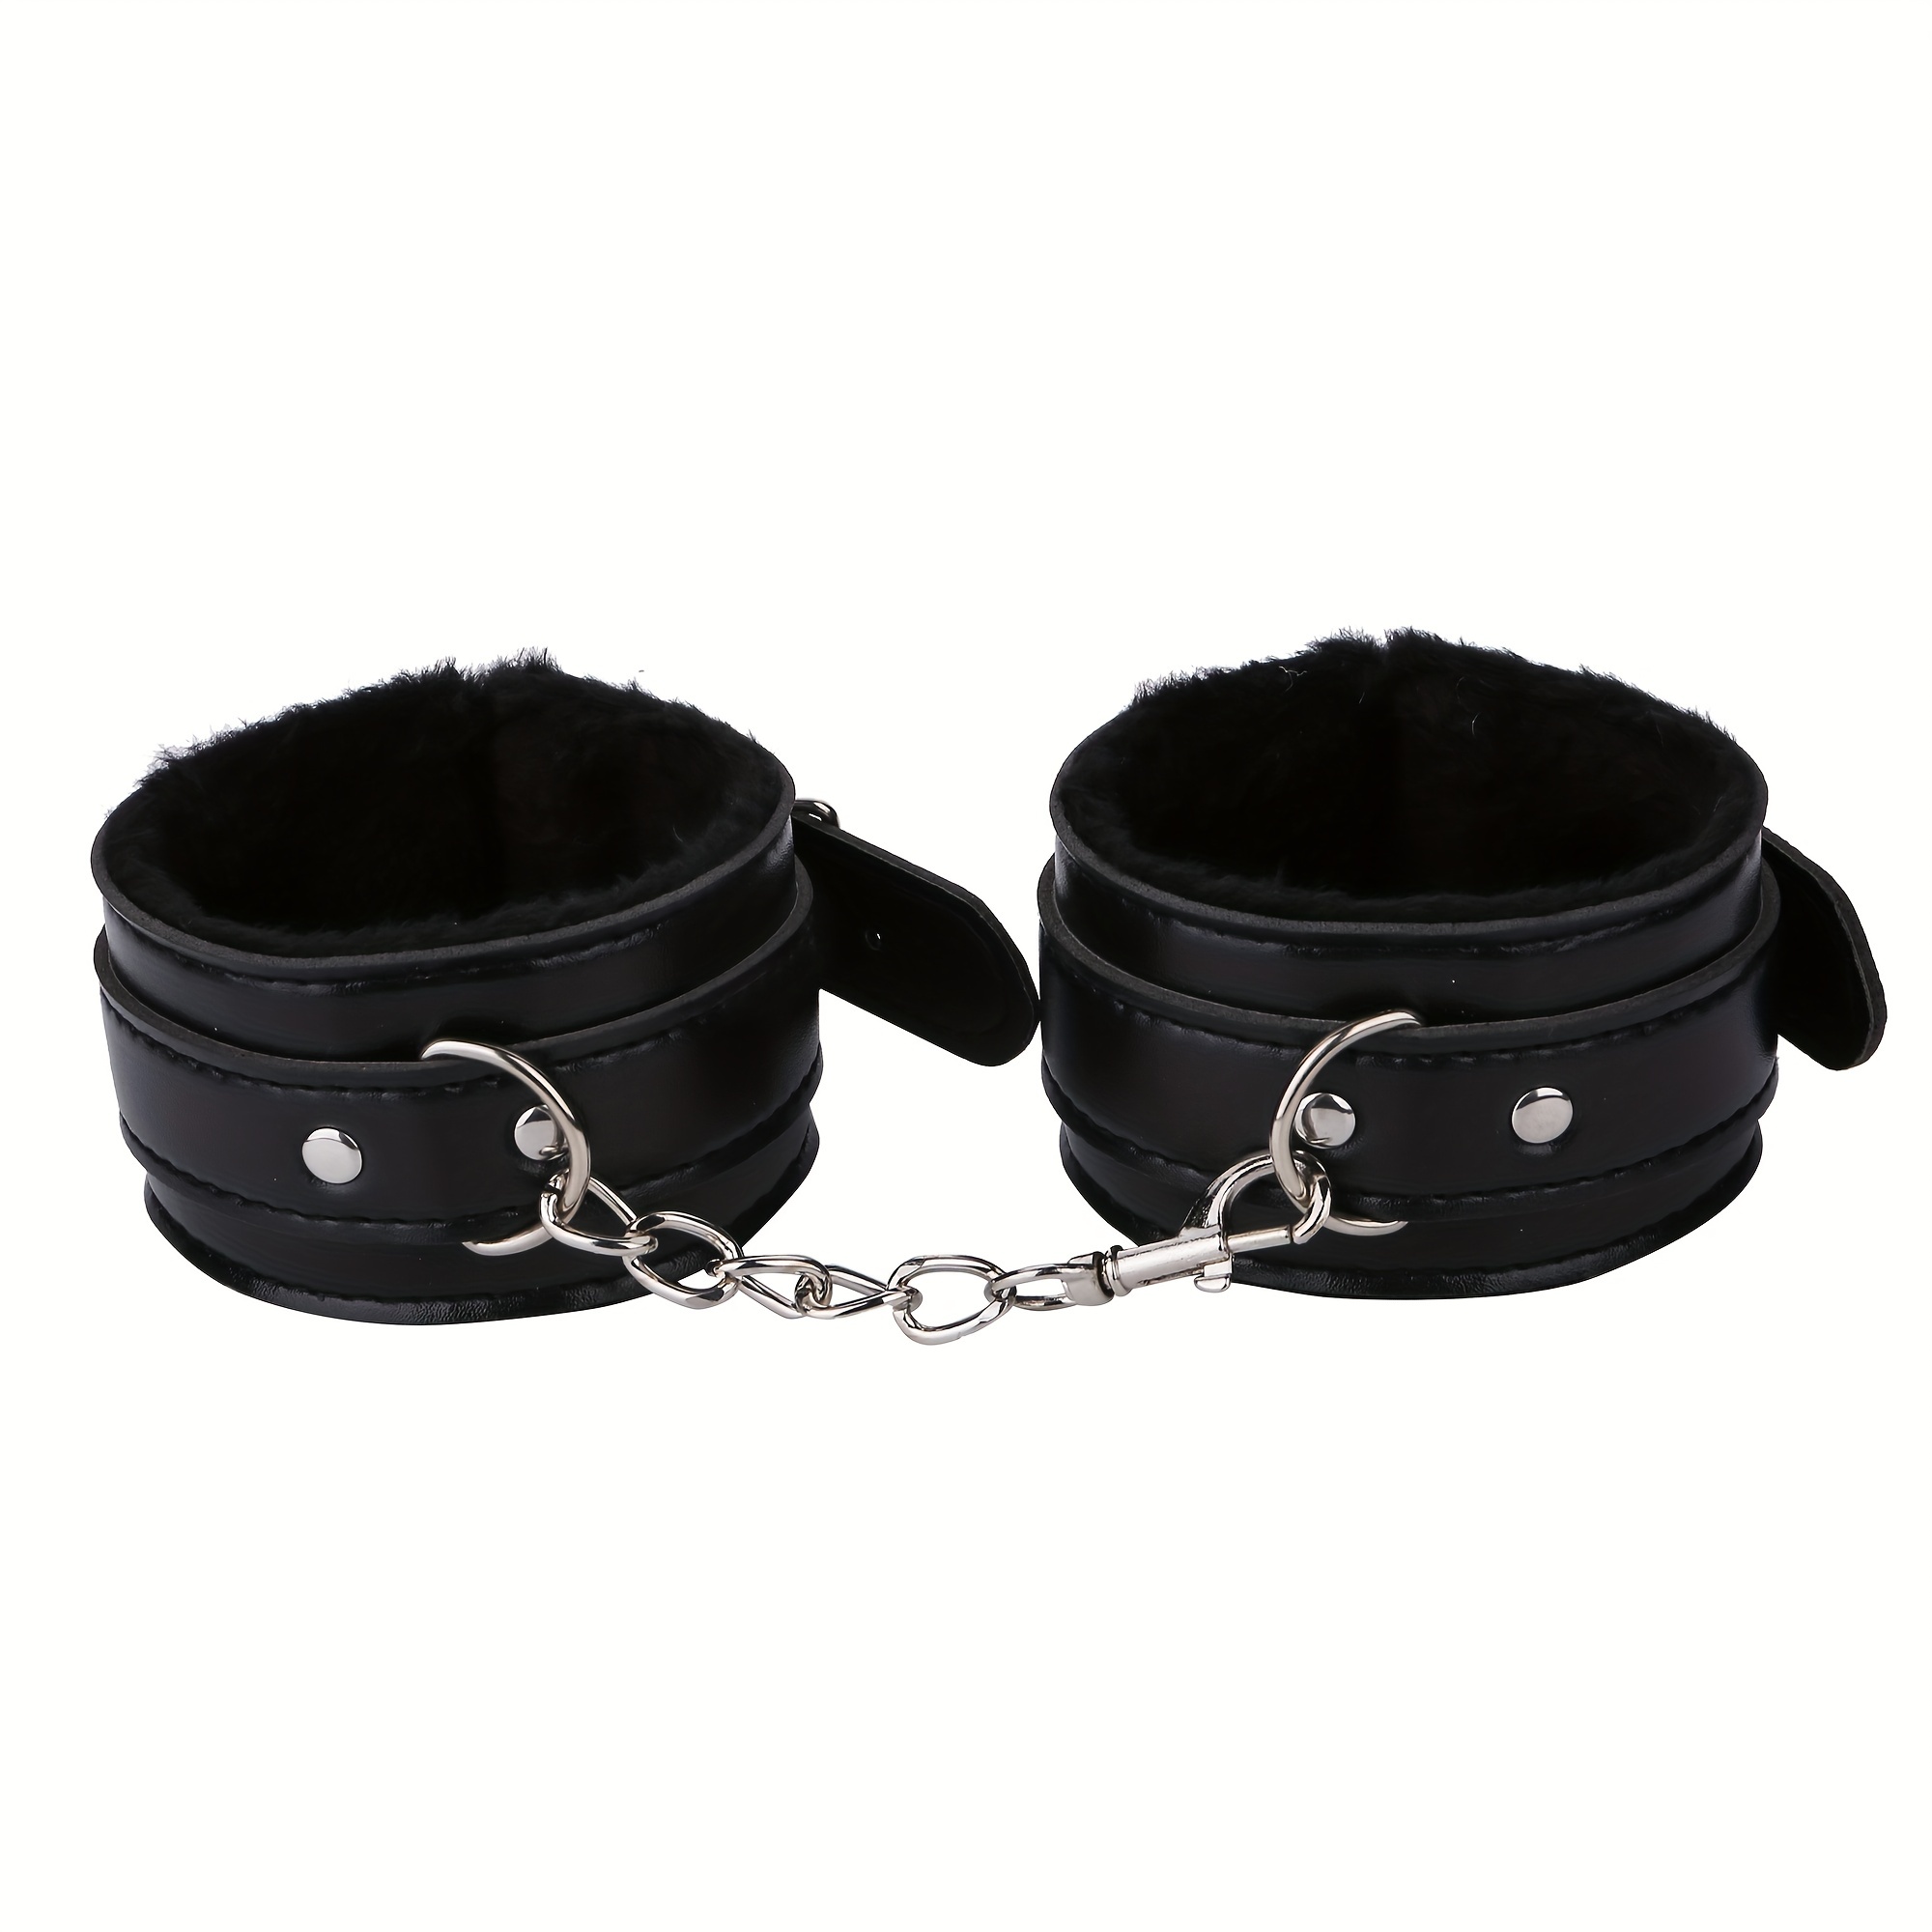  Sex Toy BDSM Restraints, 9 PCS Bondage Set, Adult Toy BDSM Kit  for Beginner and Advanced, Adult Game with Leather Texture Handcuffs,  Collar, Ankle Cuff, Blindfold, Nipple clamp for Couples Sex